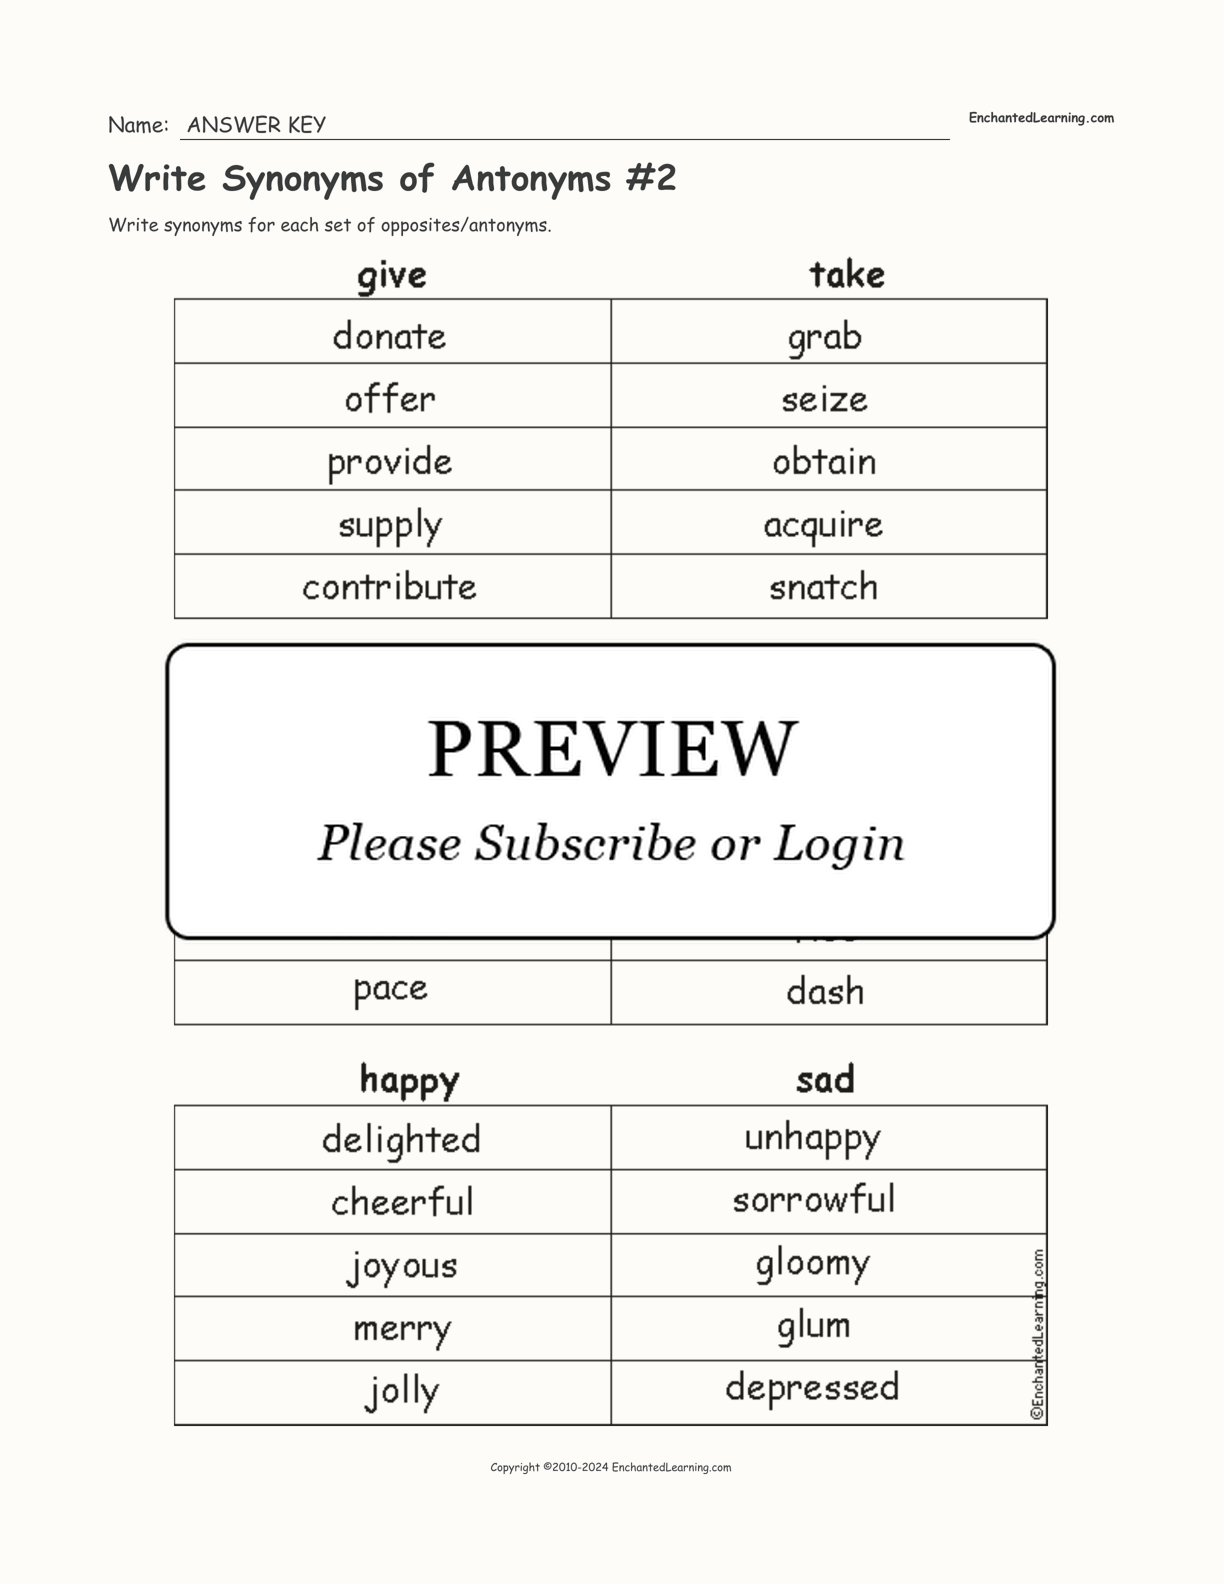 Write Synonyms of Antonyms #2 interactive worksheet page 2